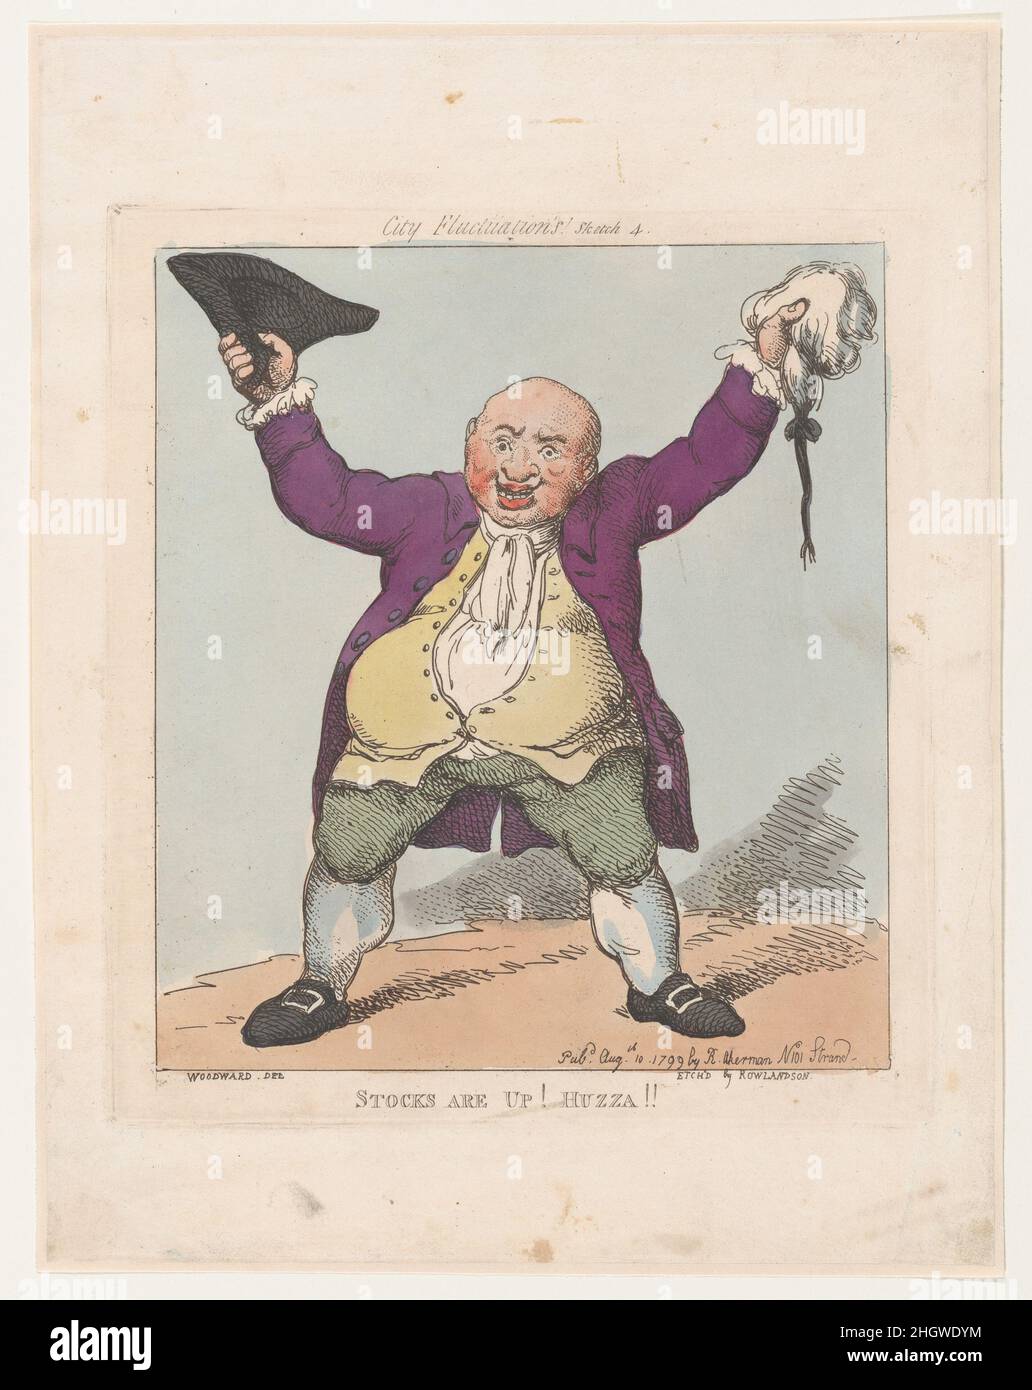 Stocks Are Up! Huzza!! August 10, 1799 Thomas Rowlandson. Stocks Are Up! Huzza!!. City Fluctuations. Thomas Rowlandson (British, London 1757–1827 London). August 10, 1799. Hand-colored etching. Rudolph Ackermann, London (active 1794–1829). Prints Stock Photo